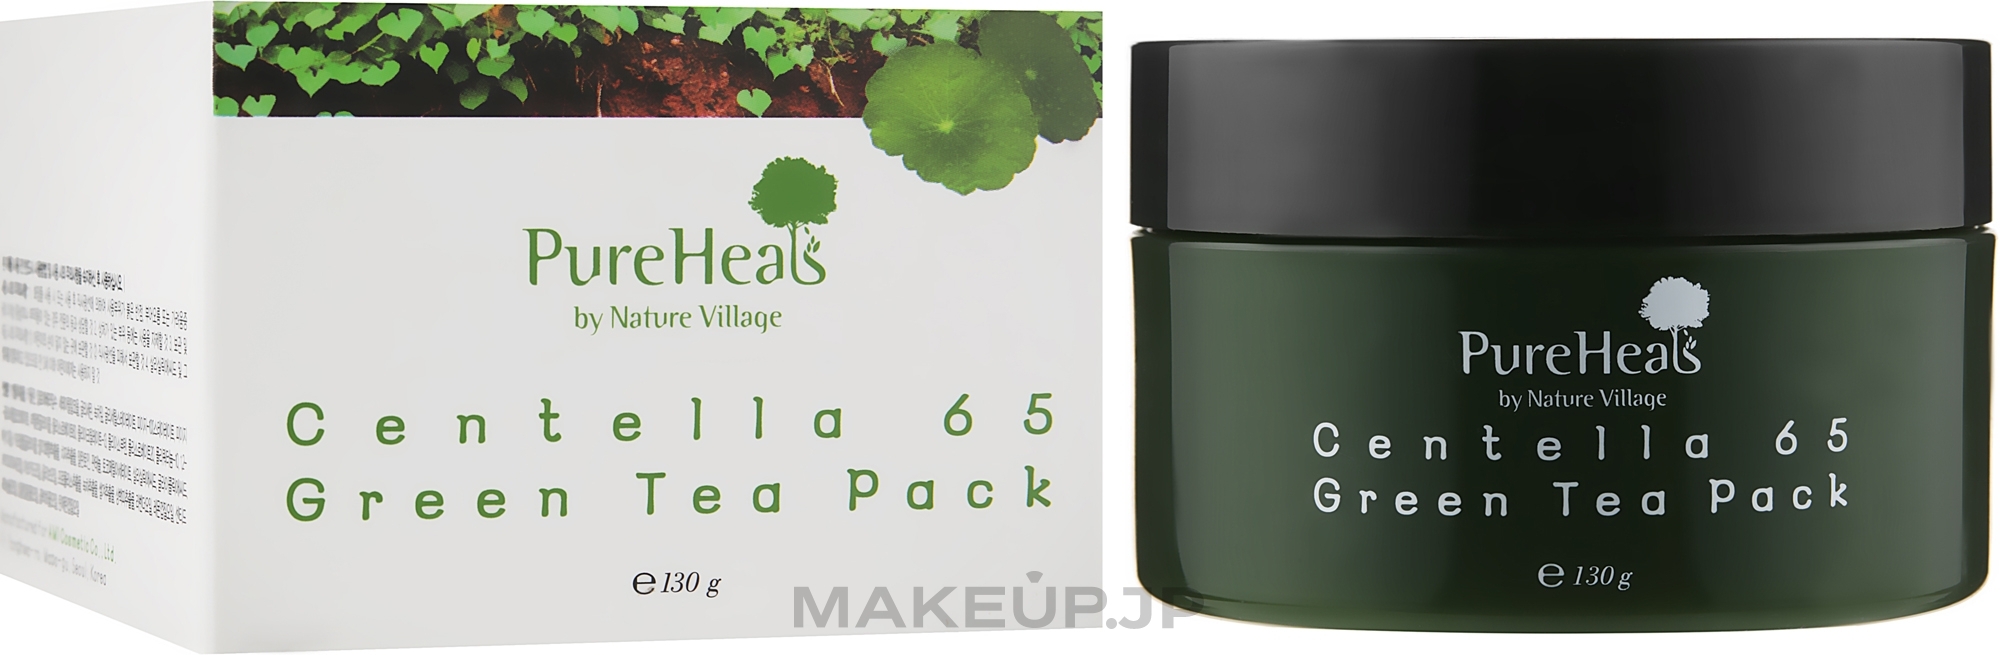 Repairing Mask with Centella Extract and Green Tea - PureHeal's Centella 65 Green Tea Pack — photo 130 g